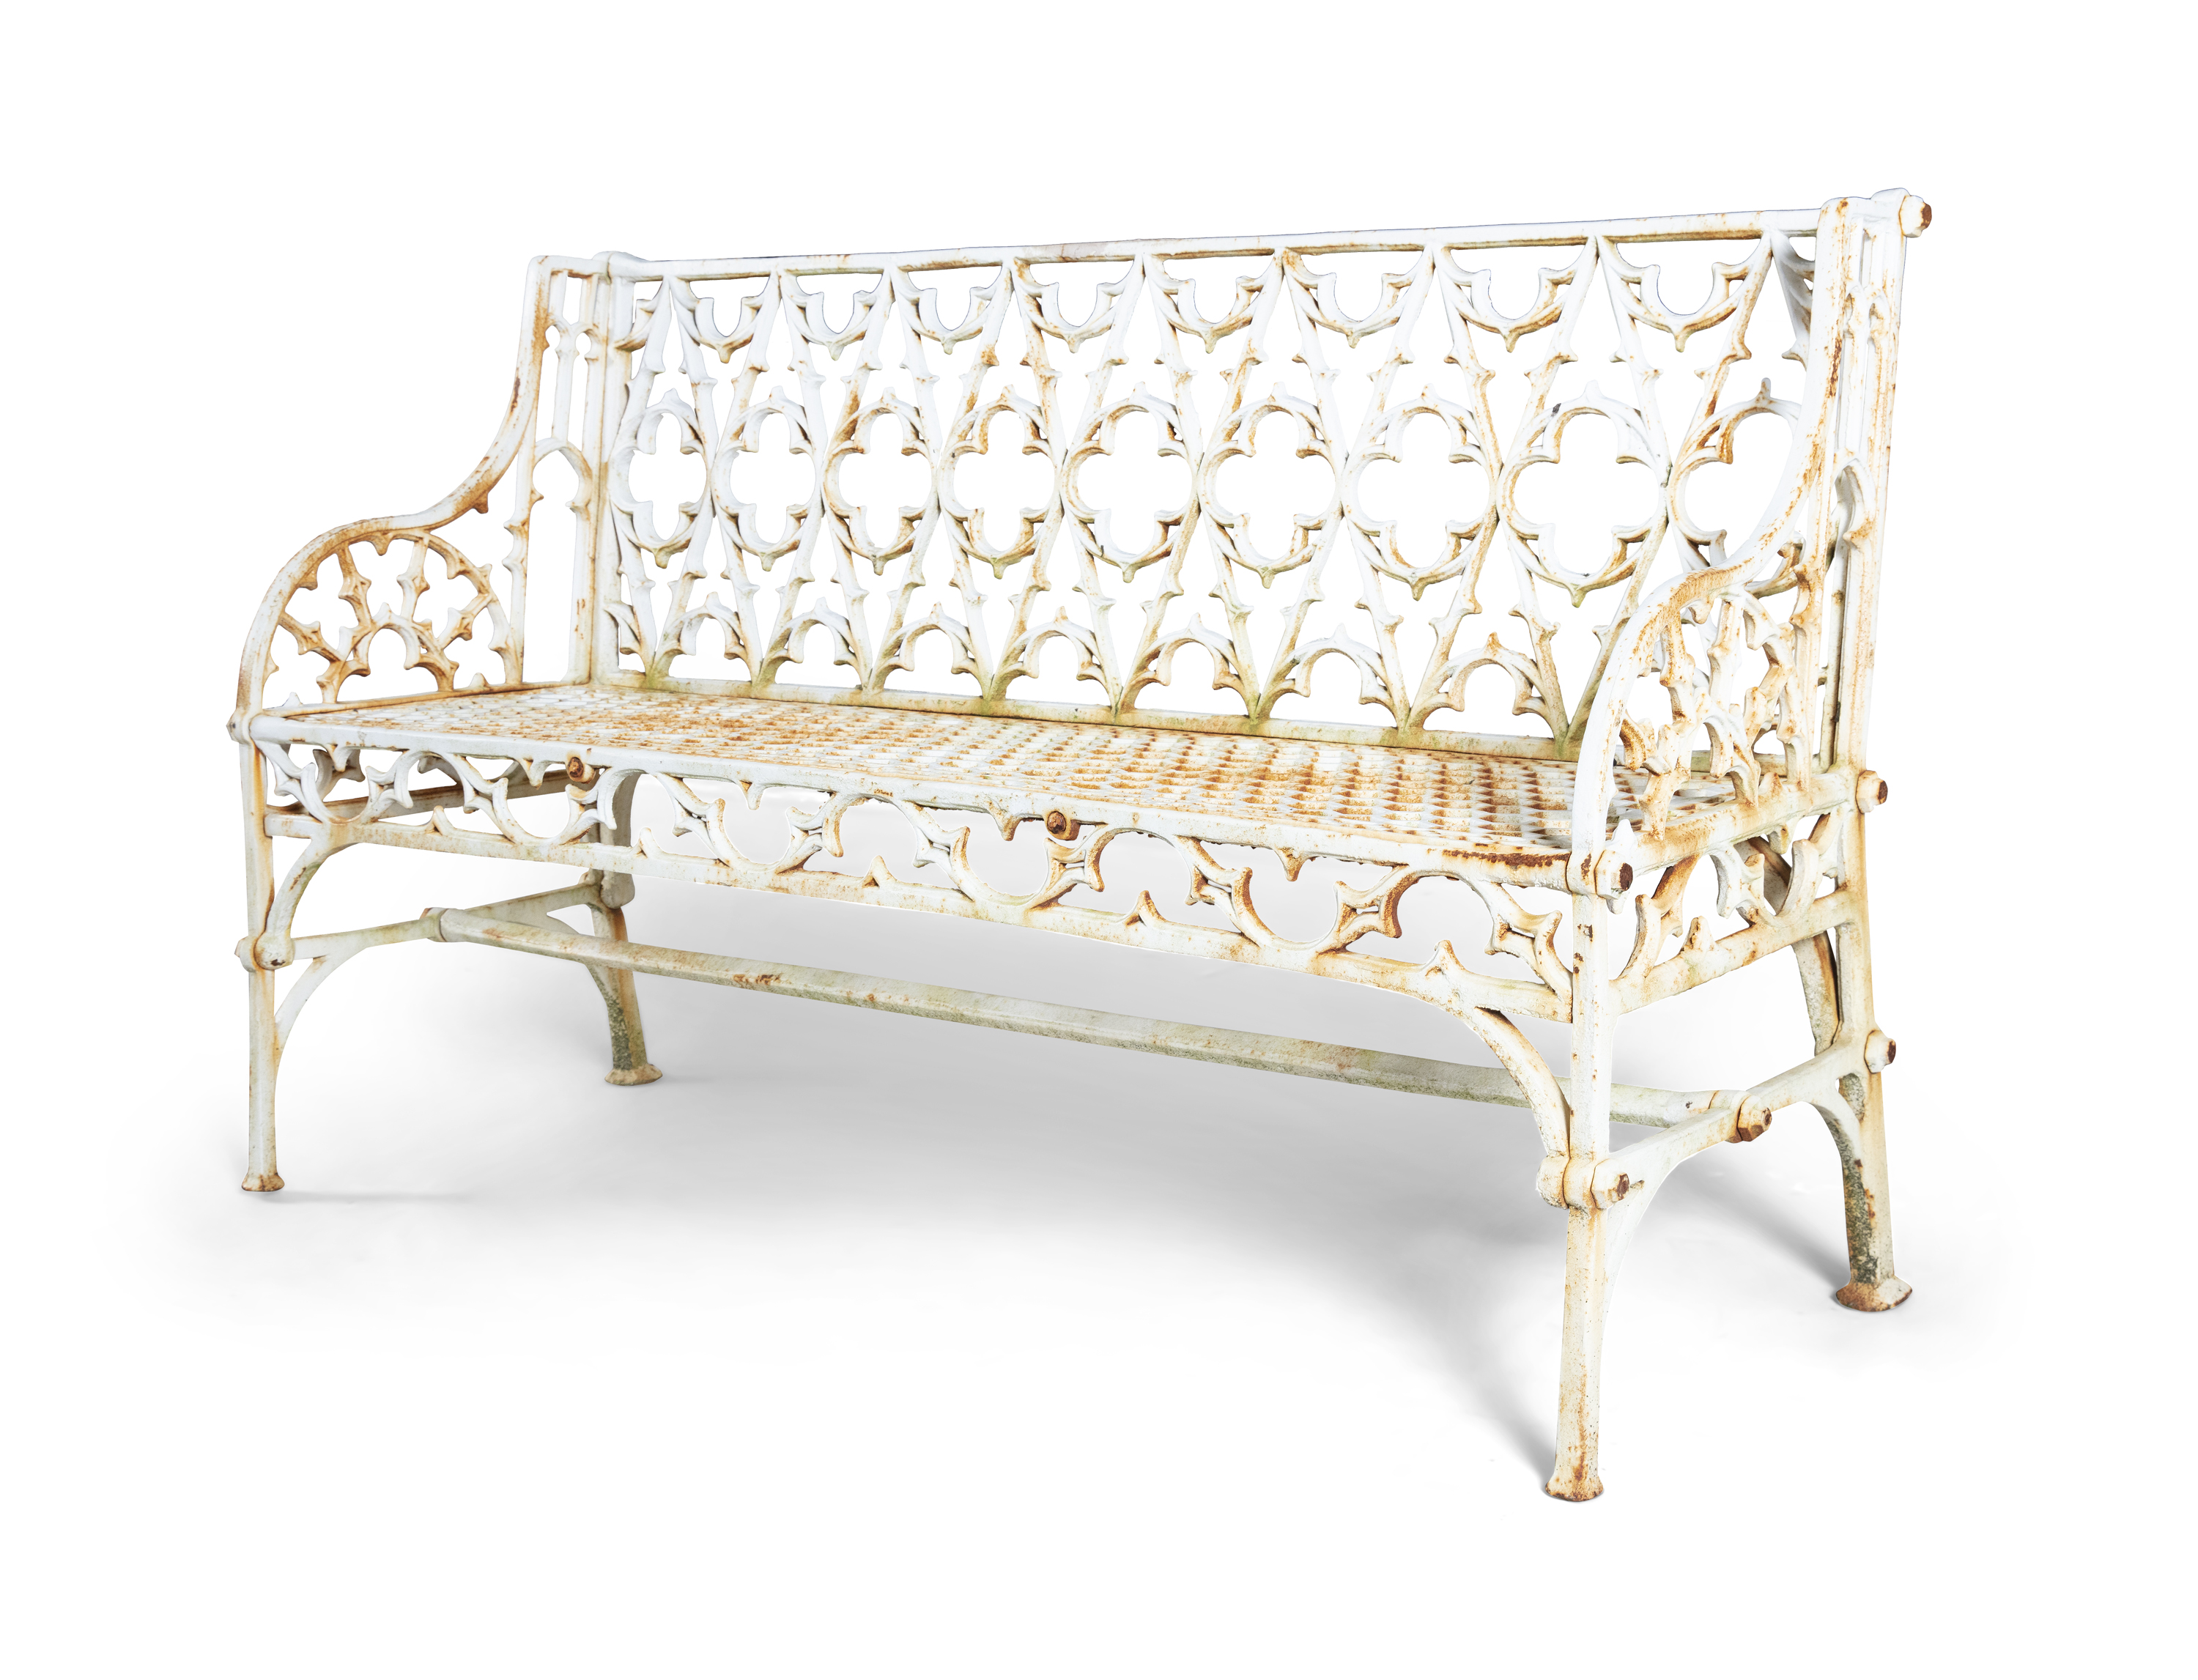 A PAIR OF VICTORIAN GOTHIC PATTERN WHITE PAINTED CAST IRON GARDEN BENCHES, pierced with - Image 5 of 5